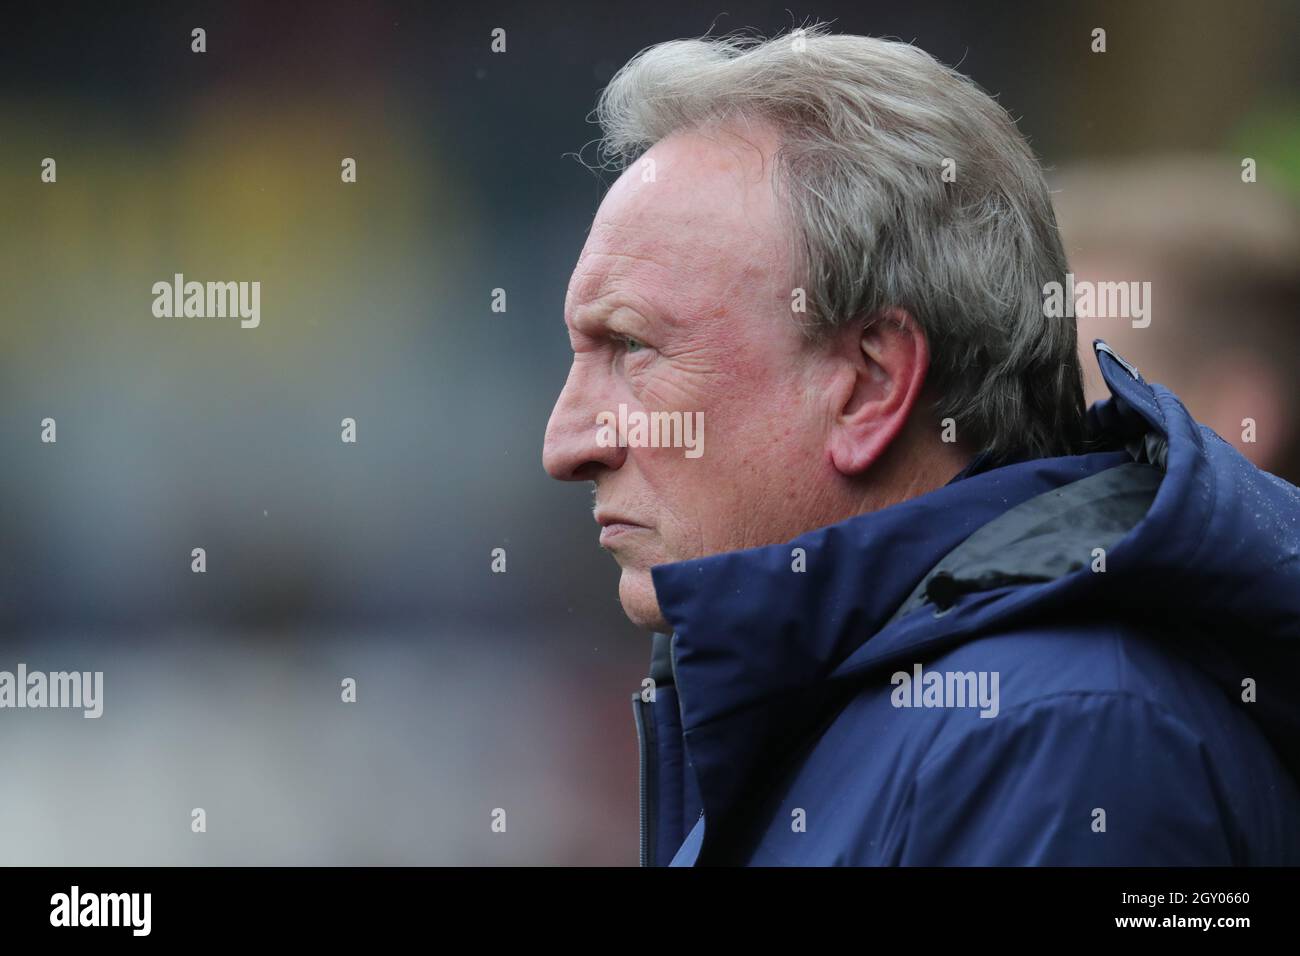 NEIL WARNOCK, MIDDLESBROUGH FC MANAGER, 2021 Stockfoto